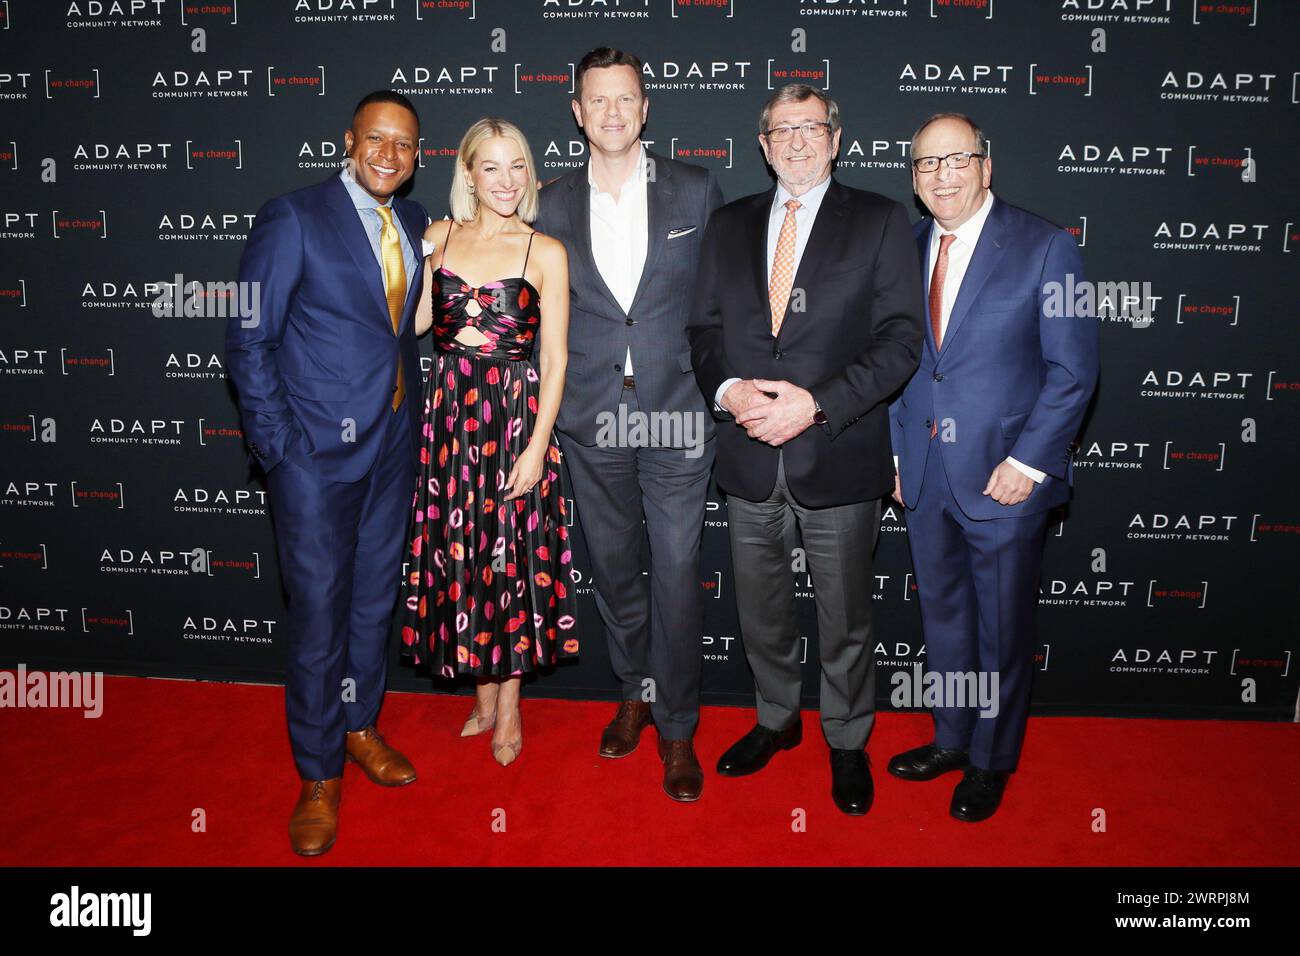 New York, United States. 13th Mar, 2024. Craig Melvin, Lindsay Czarniak, Willie Geist, Michael Dowling and Jon Lekecky during the 2024 ADAPT Leadership Awards held at Cipriani 42nd Street on March 13th in New York, NY (photo by Udo Salters/SIPA USA). Credit: Sipa USA/Alamy Live News Stock Photo